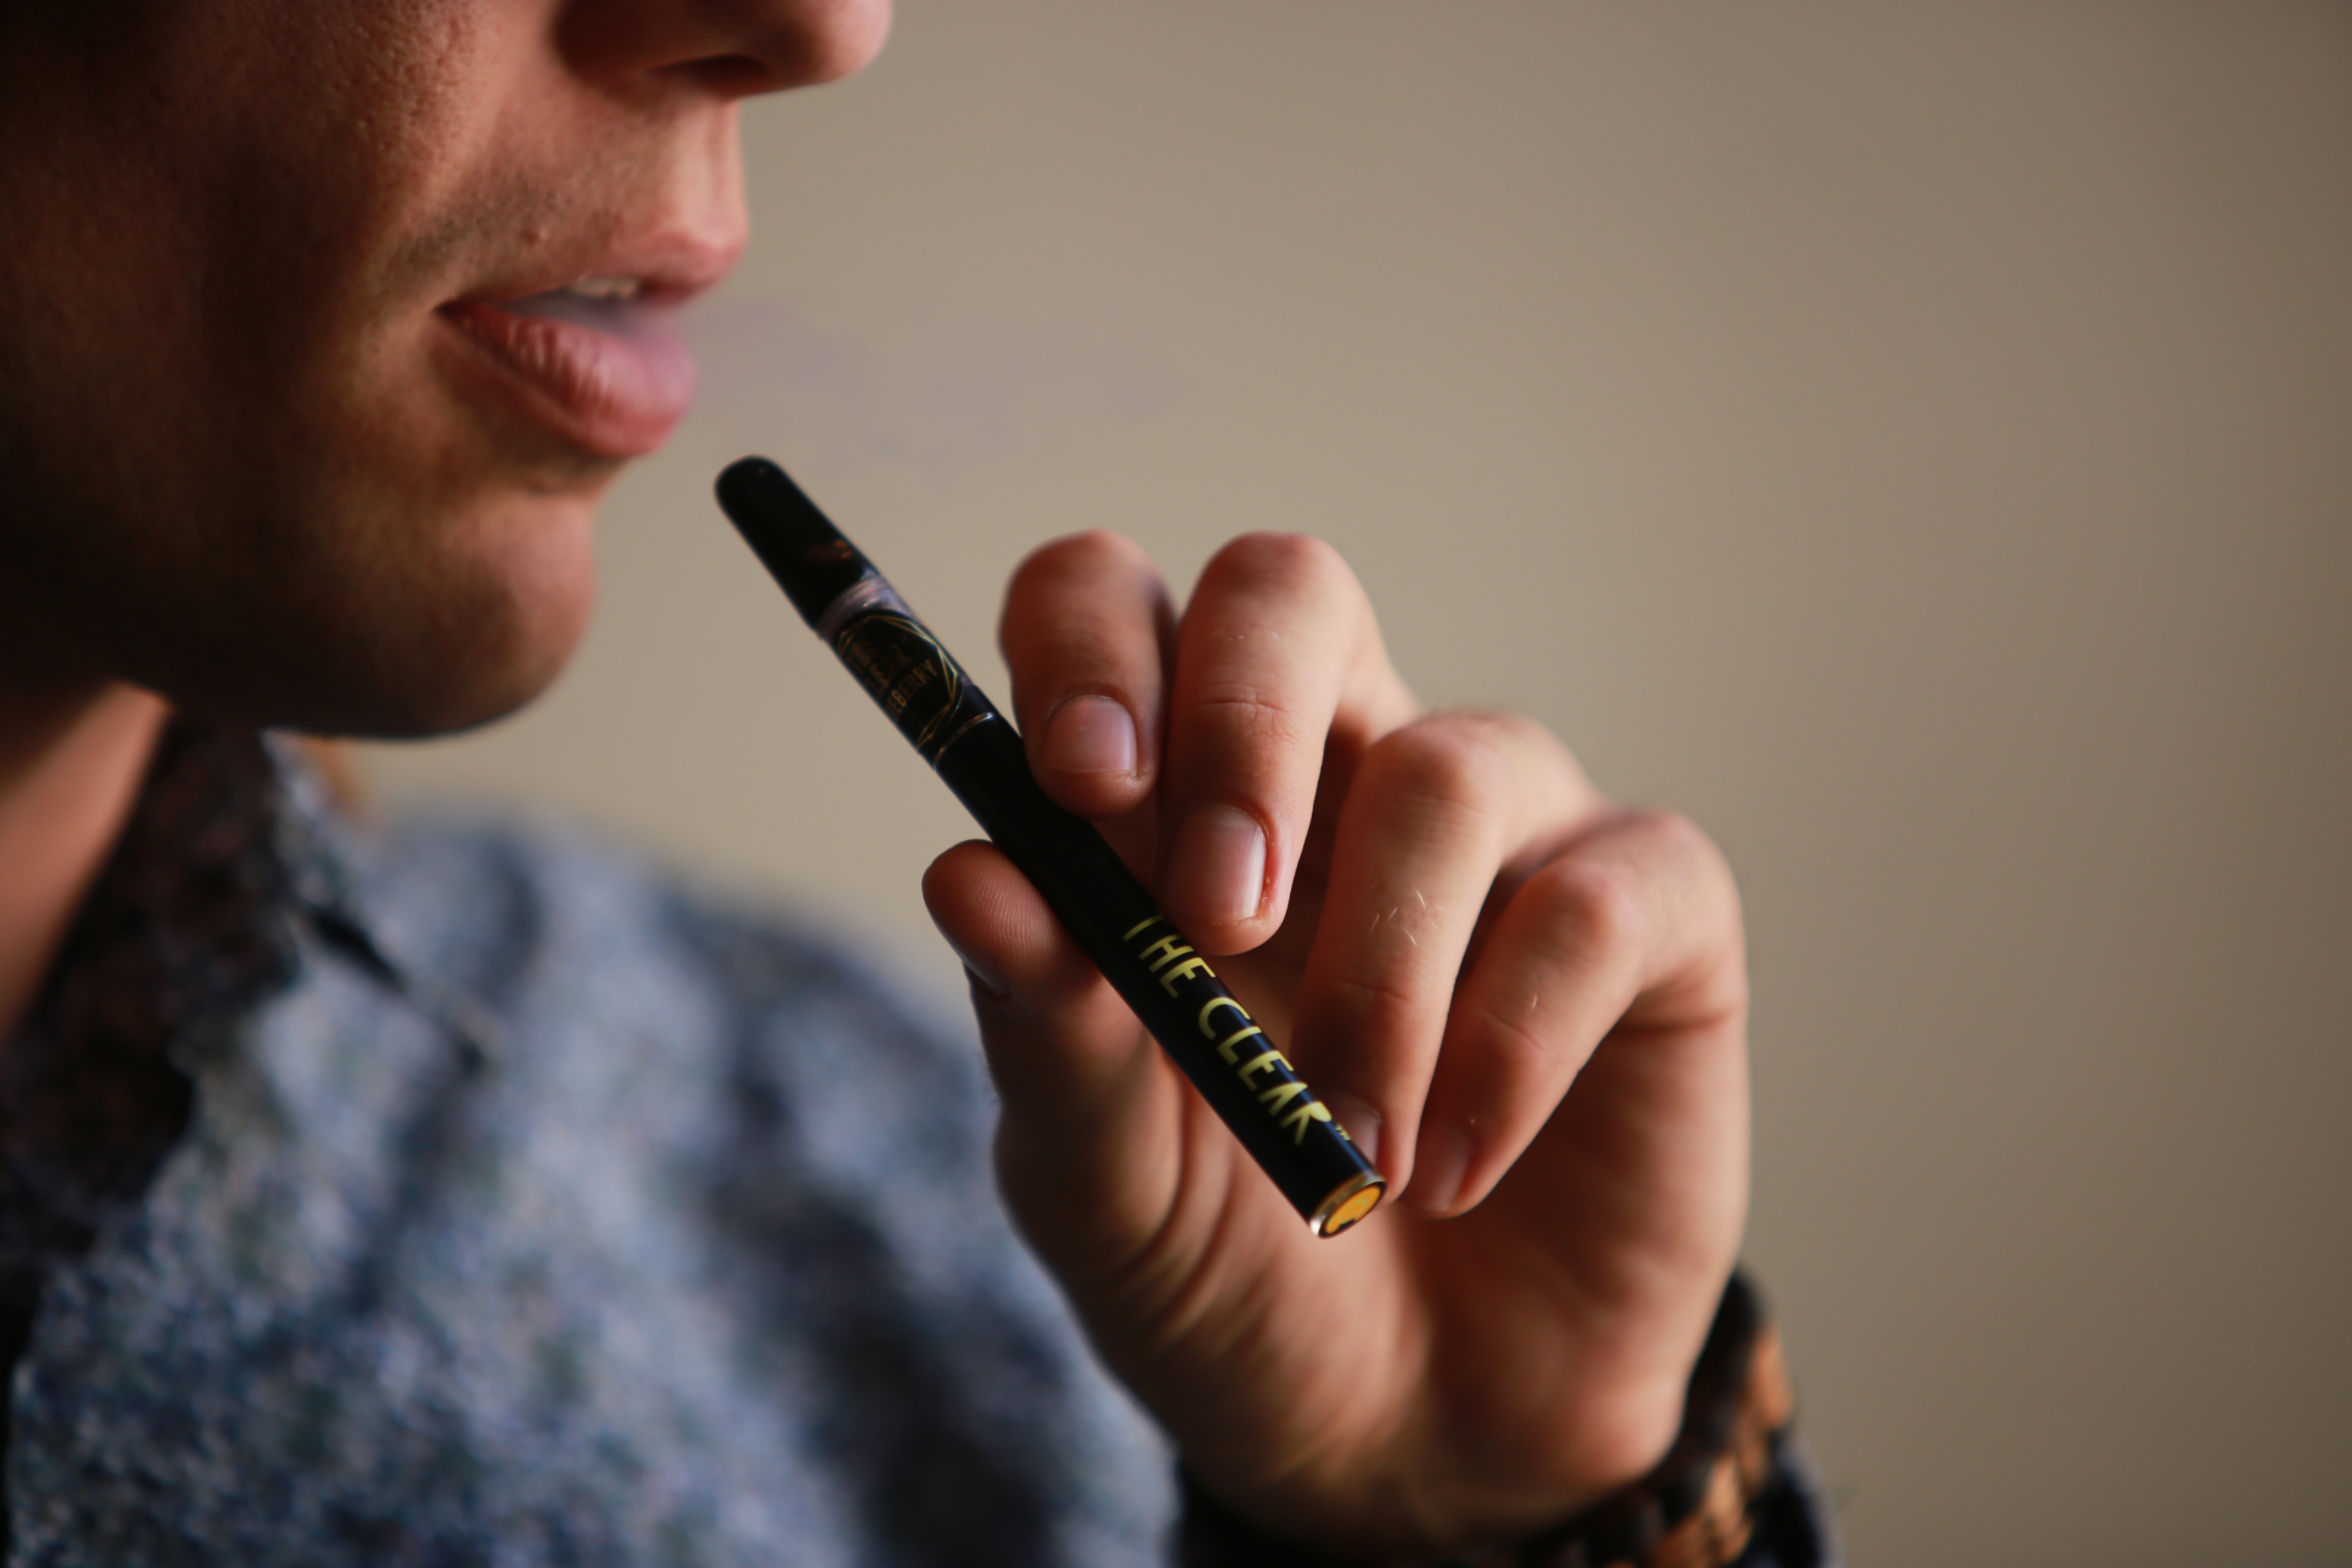 Best Dab Pen Guide: How to Find The Best One in 2021